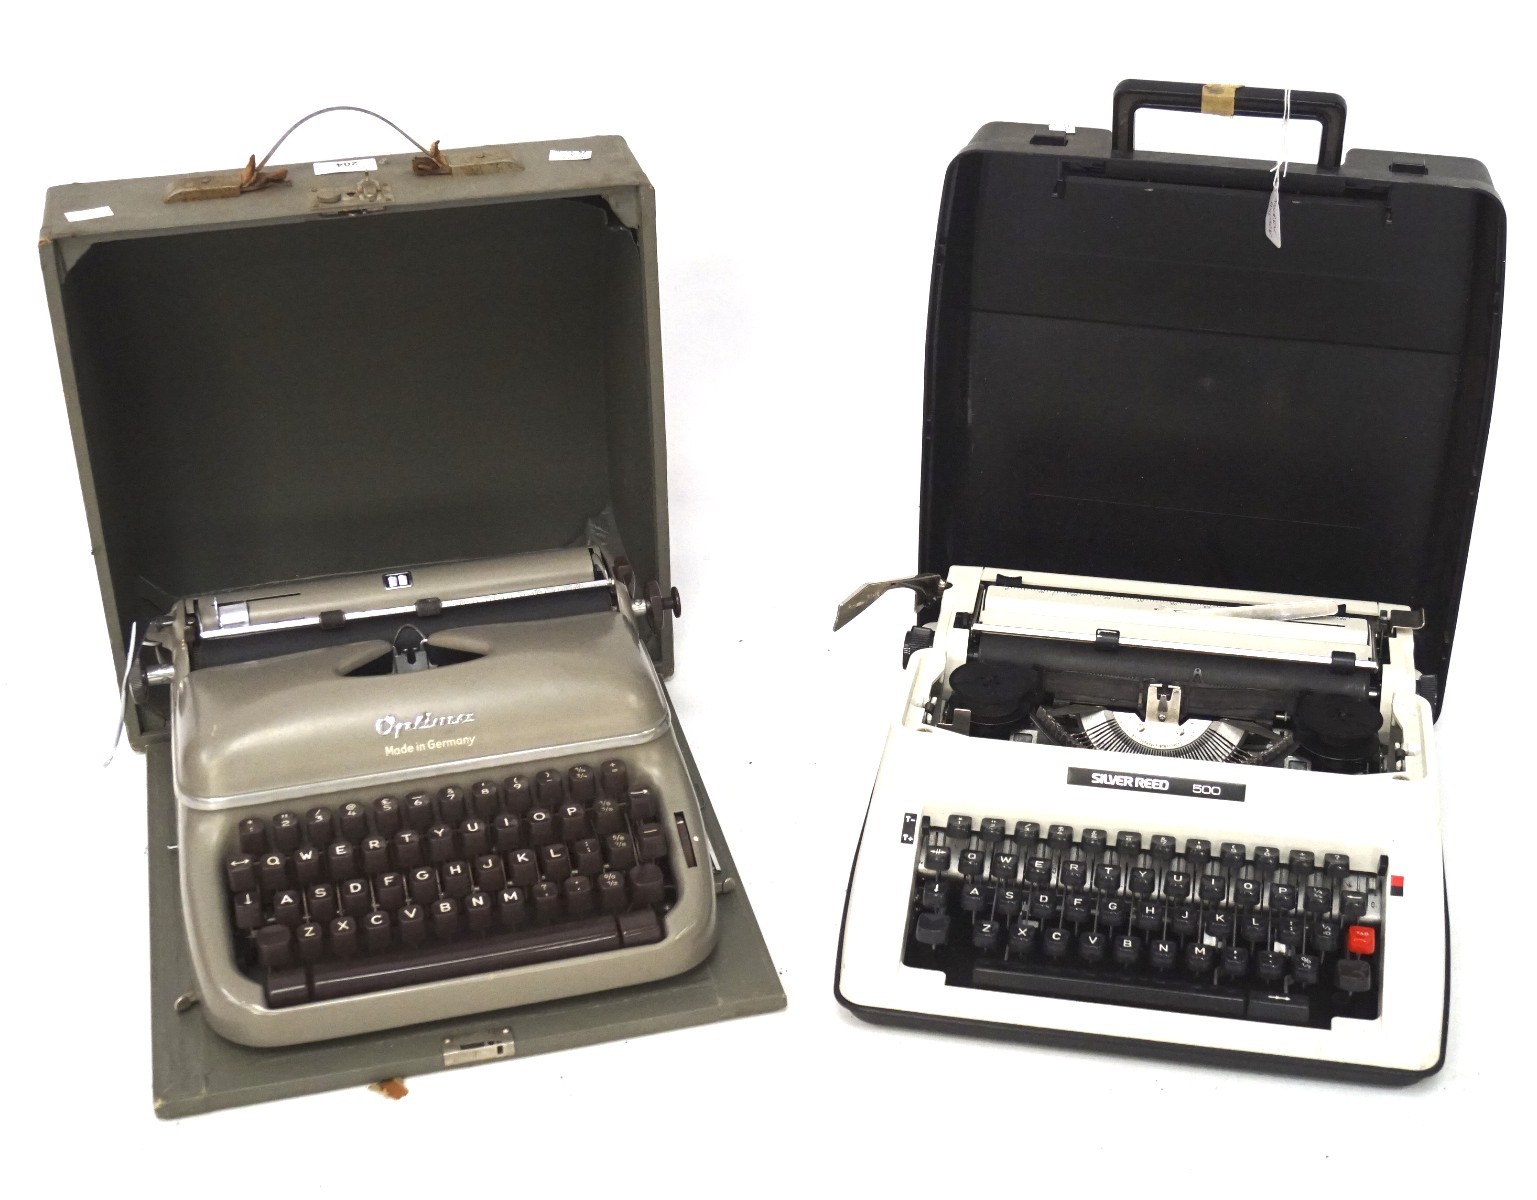 Two vintage typewriters, one being an Optima,